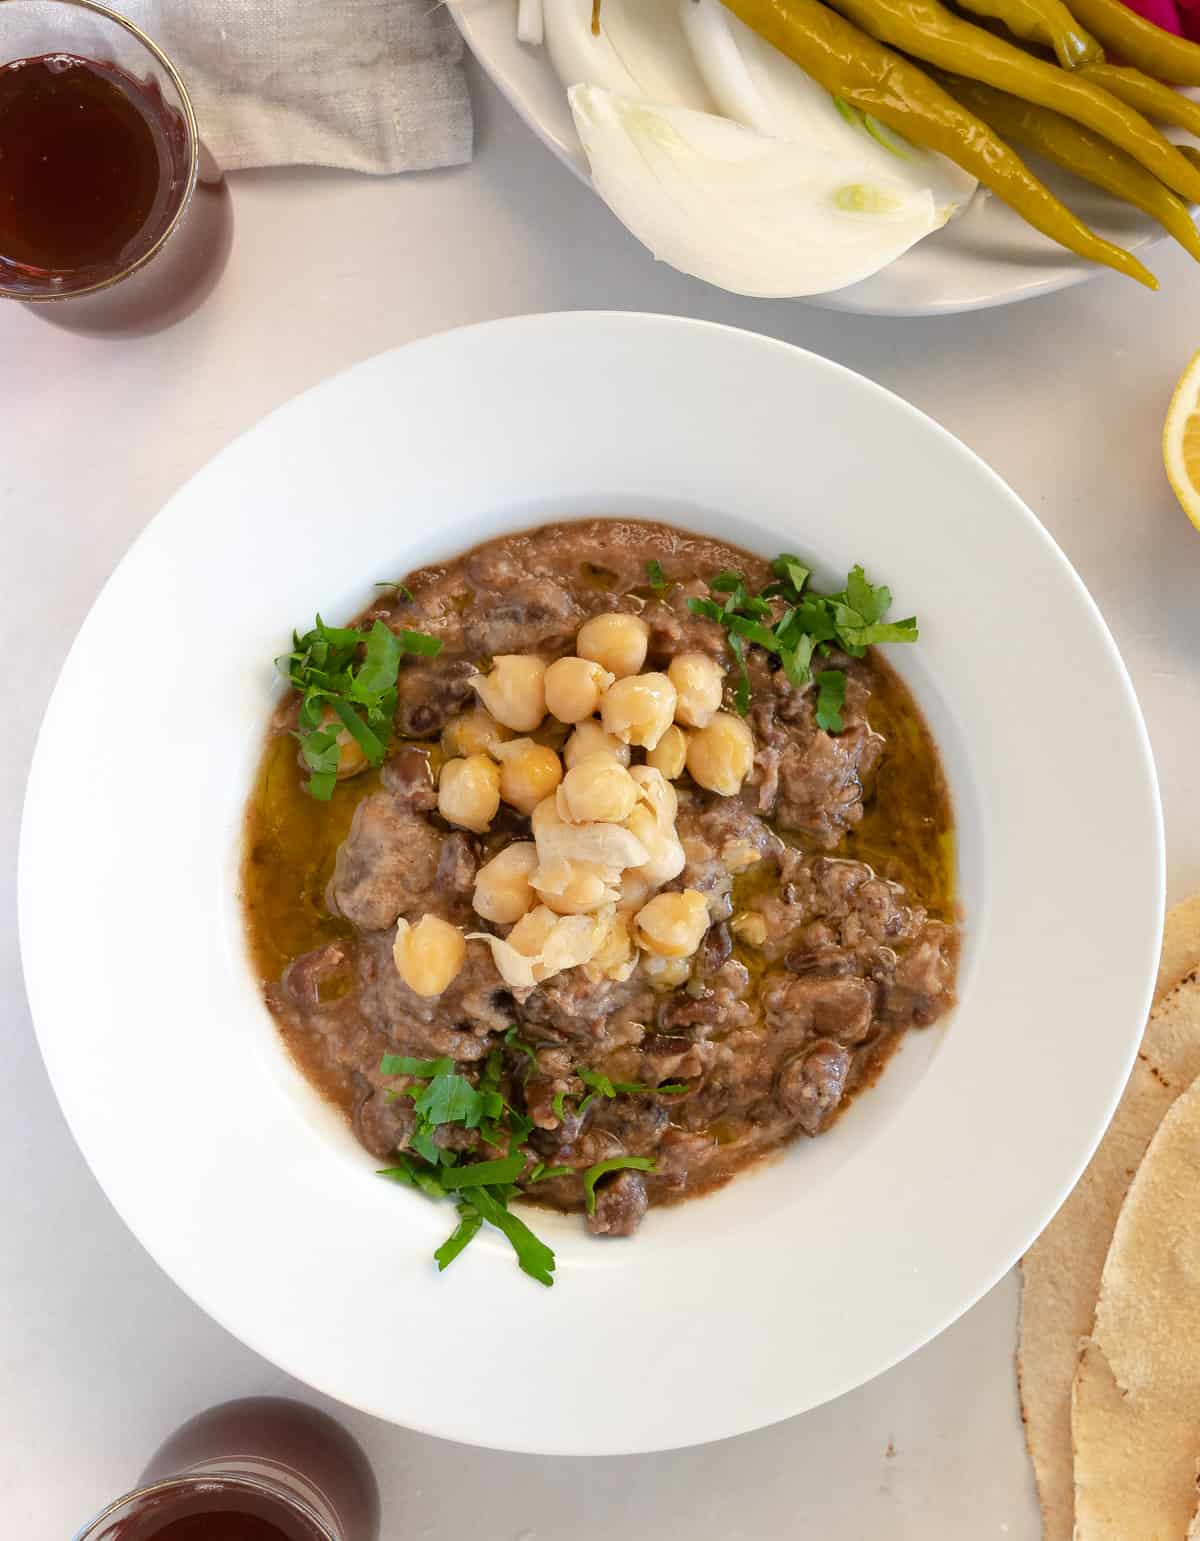 creamy brown faba beans garnished with chopped parsley and two cups of tea